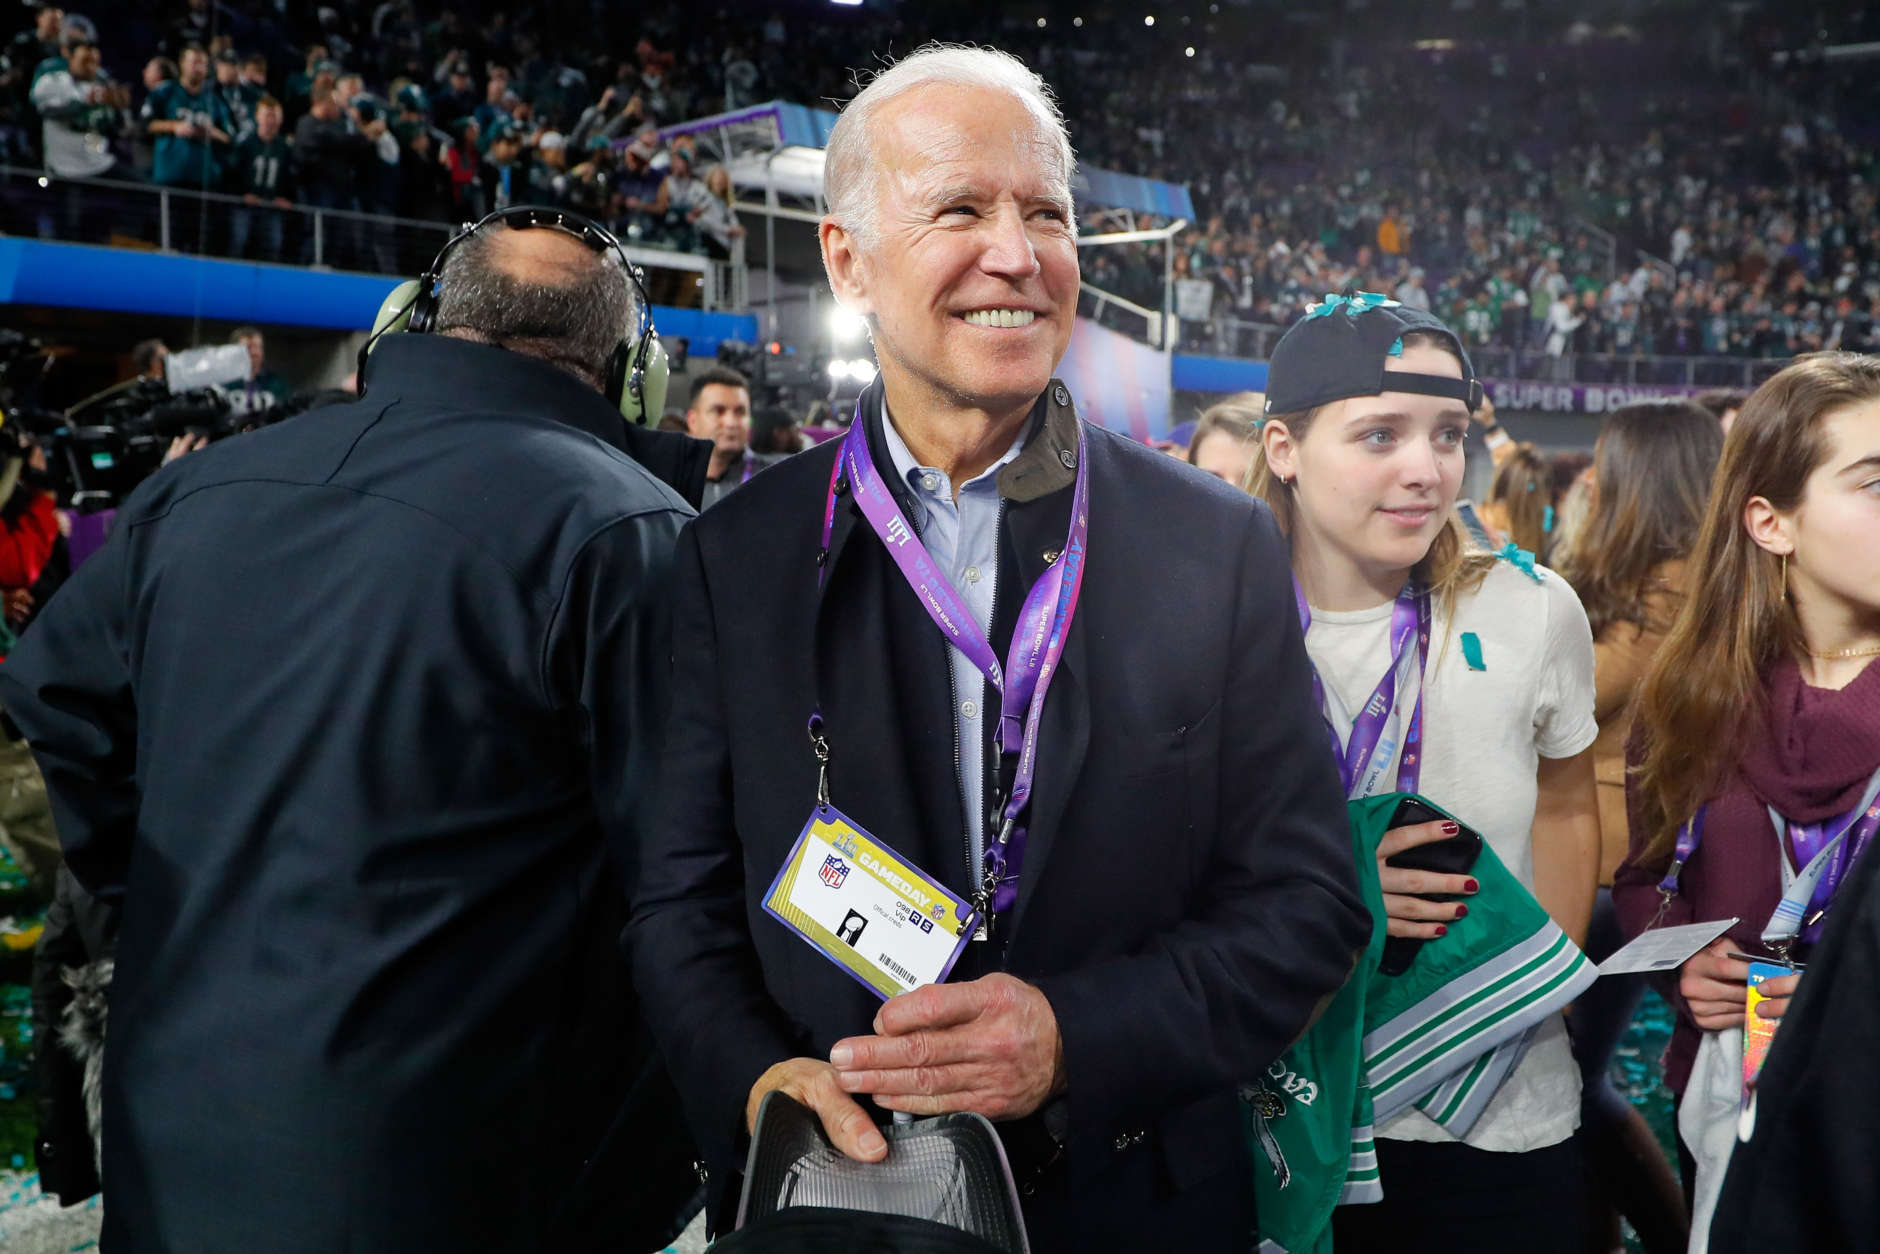 MINNEAPOLIS, MN - FEBRUARY 04:  Former Vice President Joe Biden looks on during the celebrations after the Philadelphia Eagles win over the New England Patriots in Super Bowl LII at U.S. Bank Stadium on February 4, 2018 in Minneapolis, Minnesota. The Philadelphia Eagles defeated the New England Patriots 41-33.  (Photo by Kevin C. Cox/Getty Images)